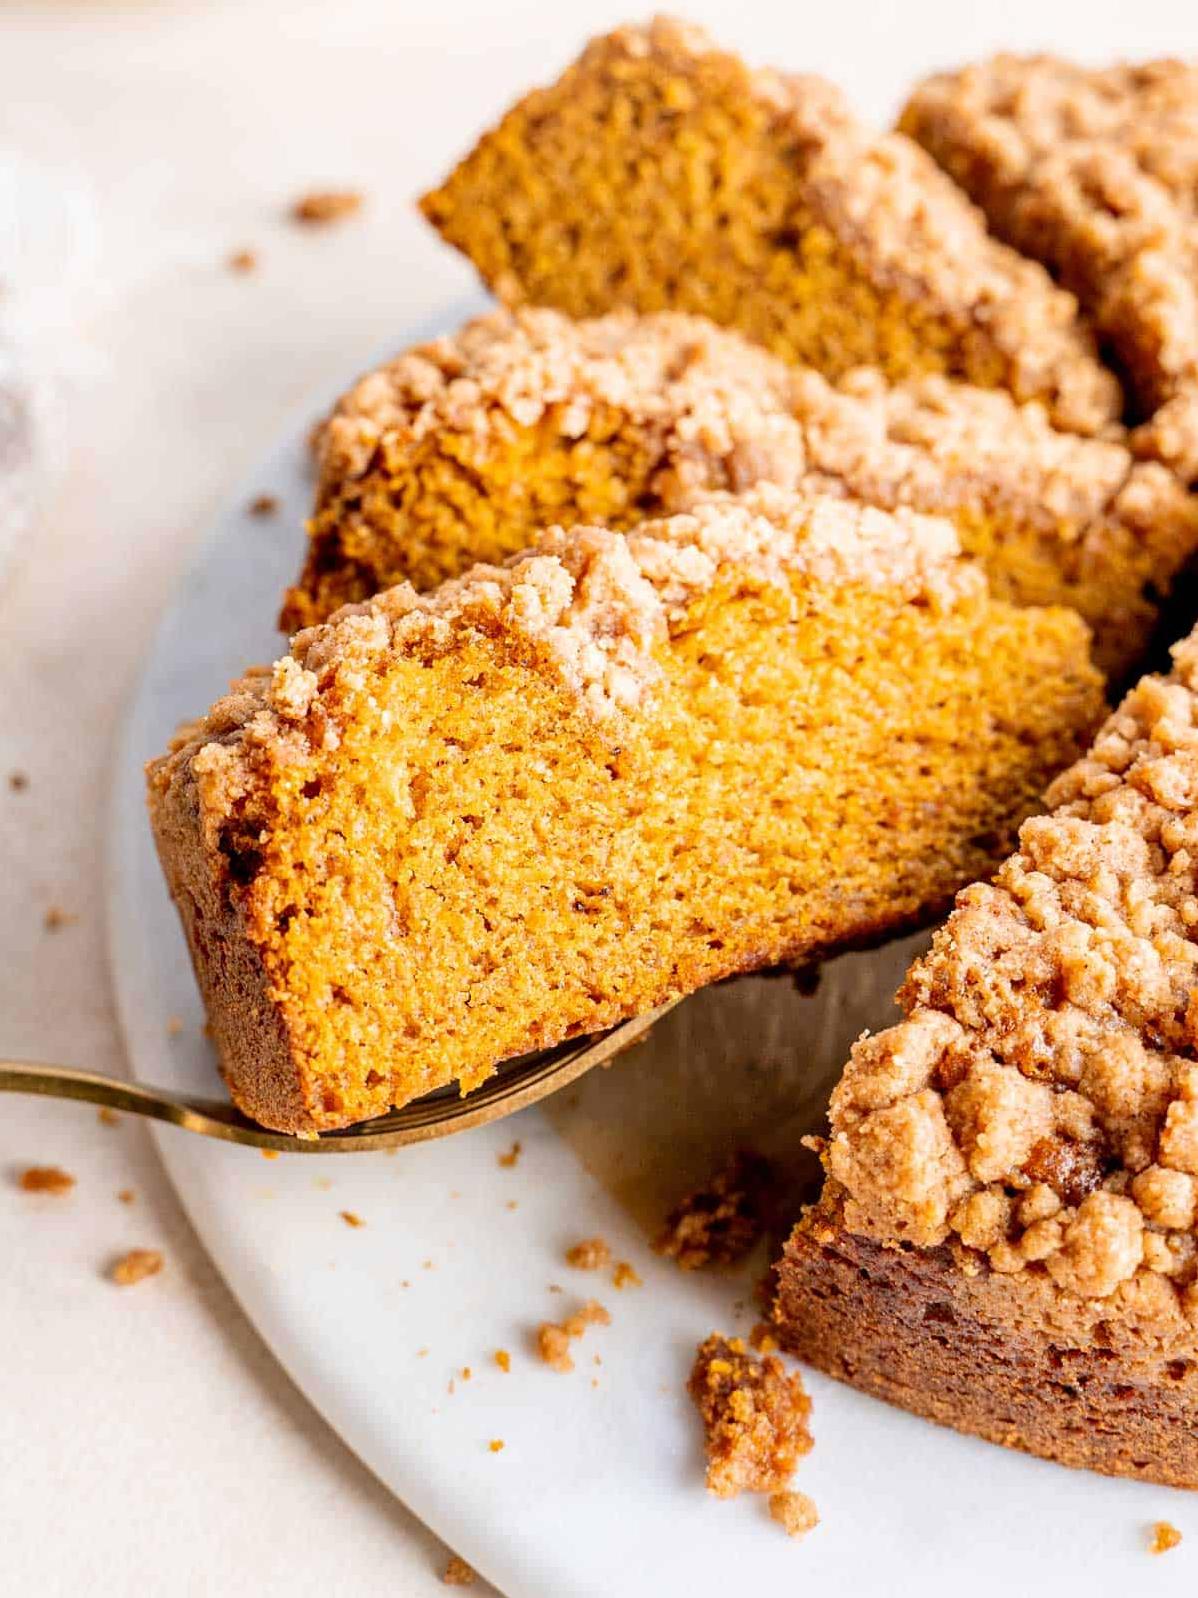  Indulge in a little slice of autumn with our Pumpkin Coffee Break Cake!